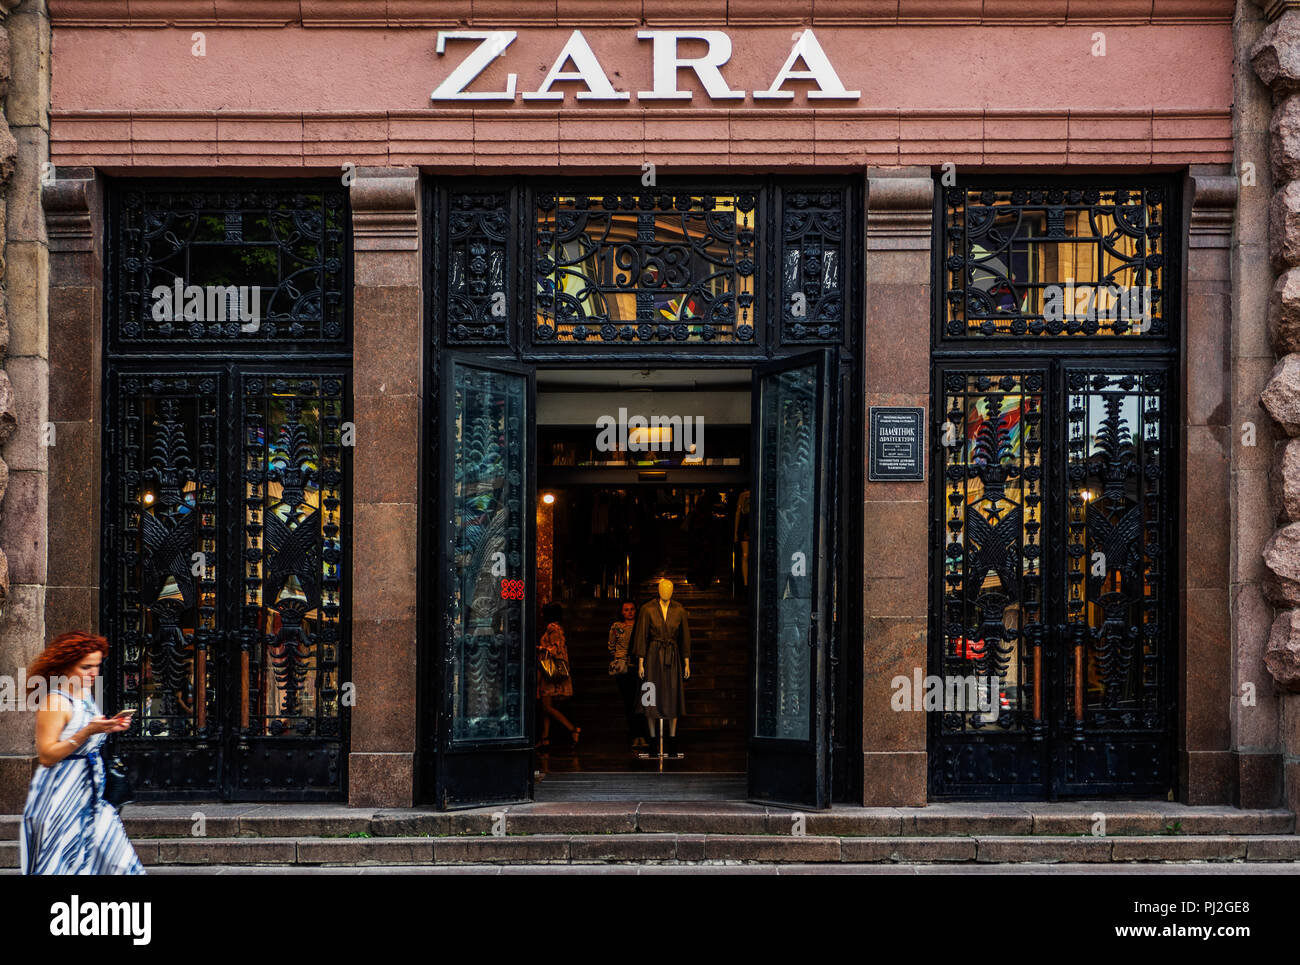 Zara store. Zara is one of the largest international fashion companies and  it's the flagship chain store of the Inditex group Stock Photo - Alamy